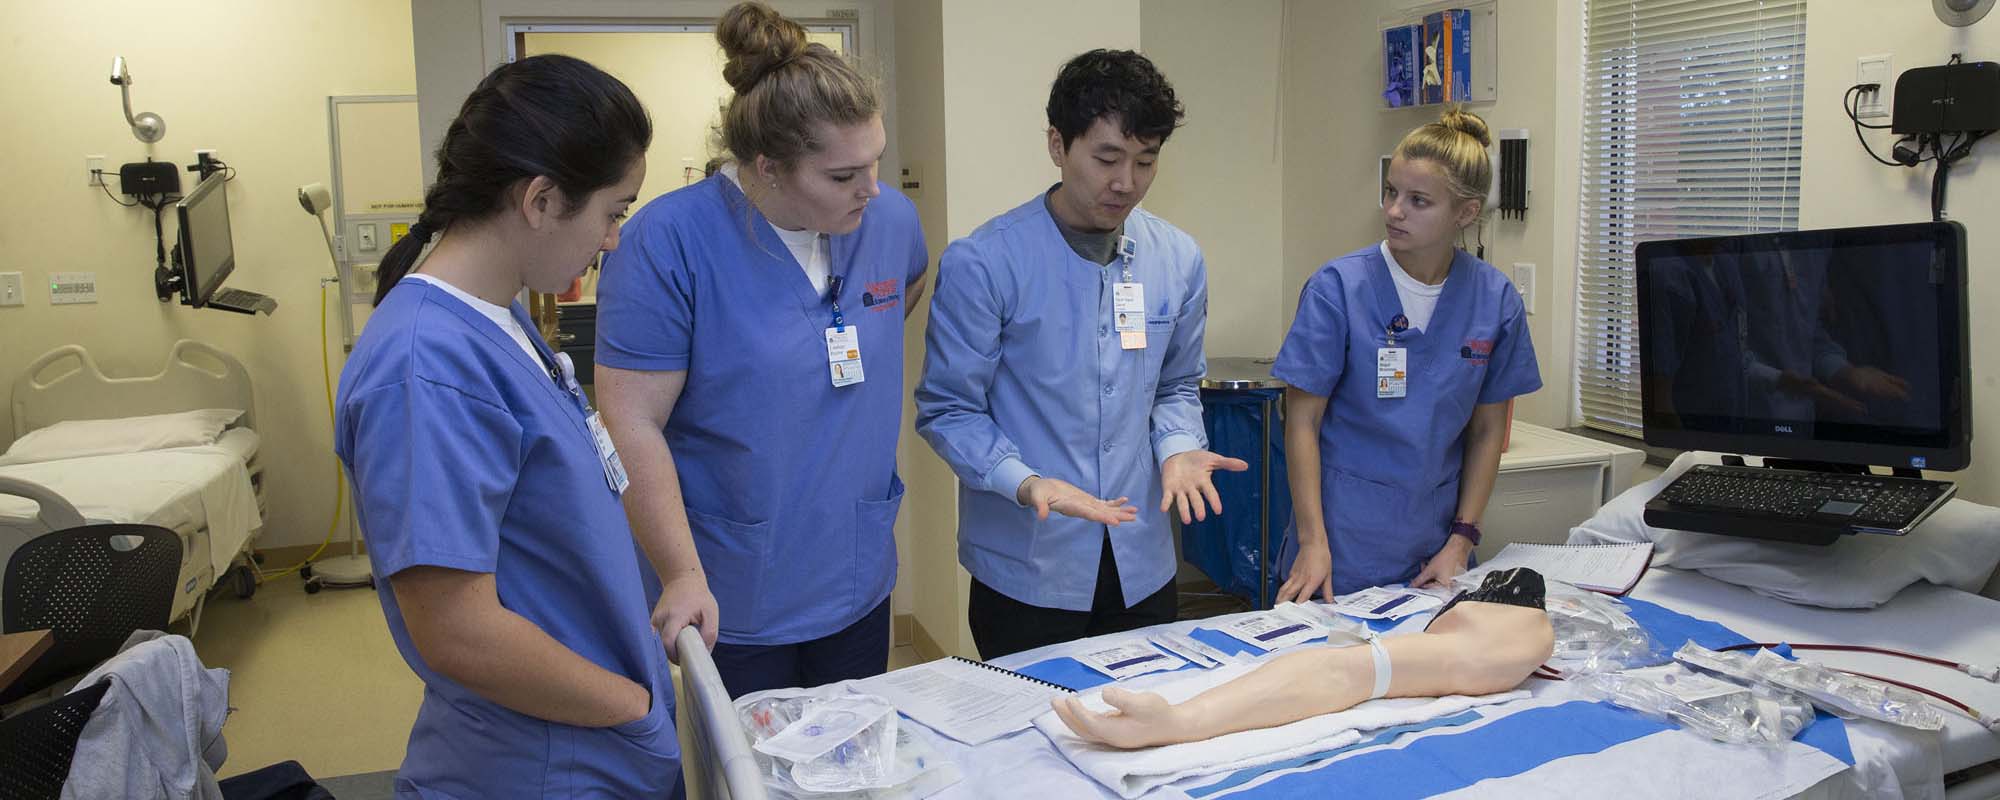 Nursing students listen to an RN talk about a procedure in a simulation lab